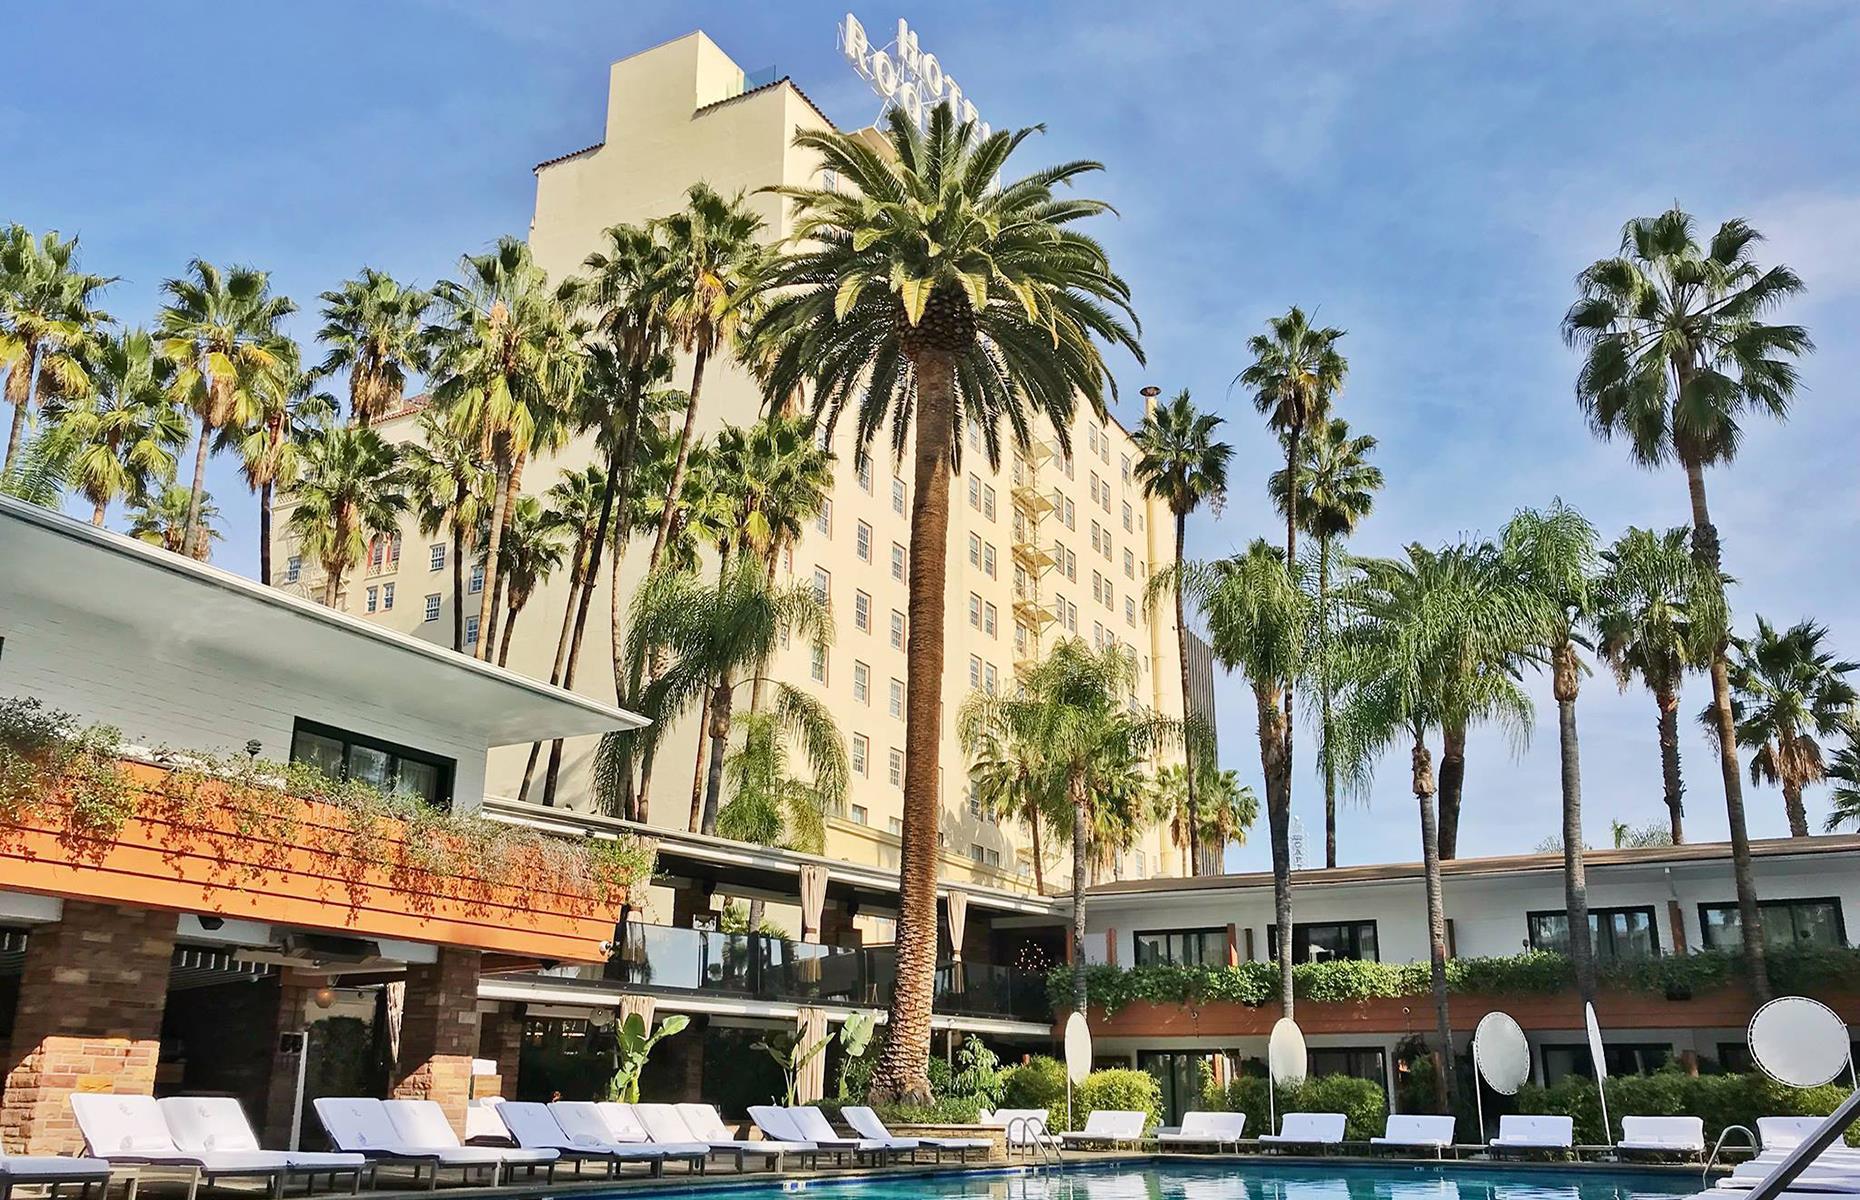 <p>Want to rub shoulders with Hollywood's A-listers? Over the decades, <a href="https://www.thehollywoodroosevelt.com/">this ritzy hotel</a> – established in 1927 – has played host to showbiz heavyweights like Marilyn Monroe and Charlie Chaplin. And it's said to be a favored haunt for the ghosts of Hollywood past. Among the celebrity specters is Montgomery Clift, who has been accused of tapping unsuspecting guests on the shoulder, and Carole Lombard, who's been spotted drifting about the halls.</p>